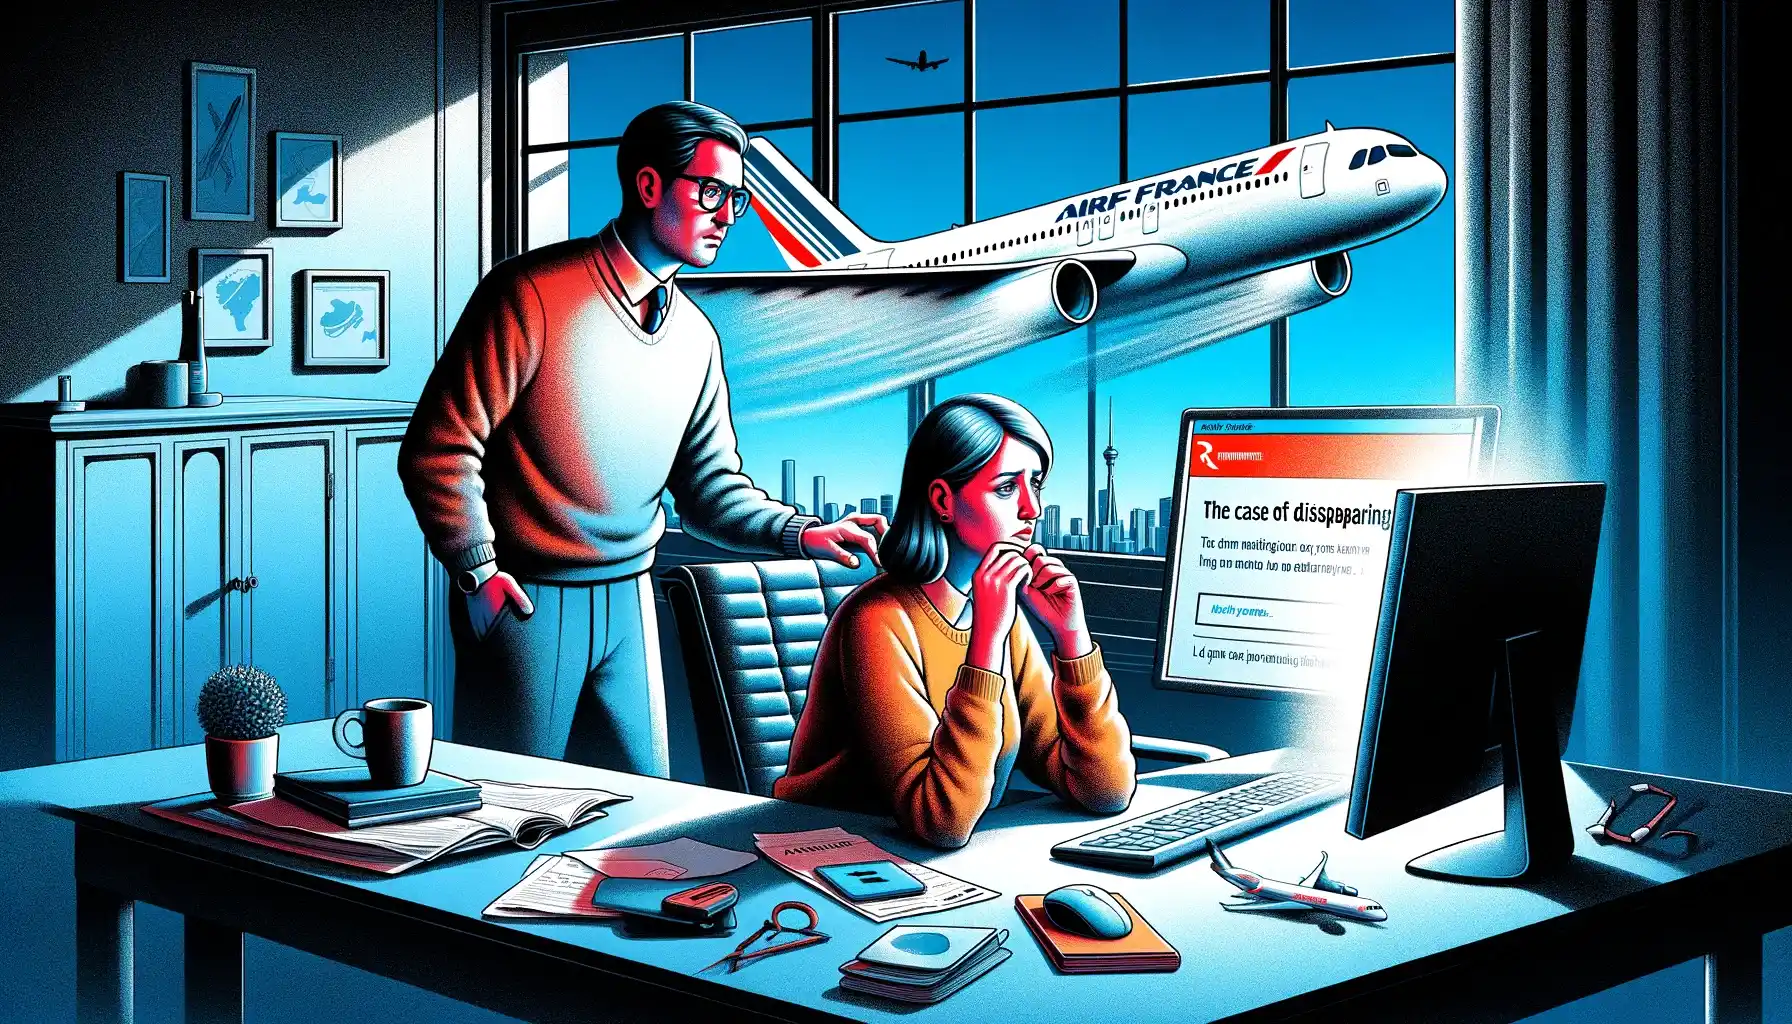 A couple look worriedly at a computer screen with an airplane in the background